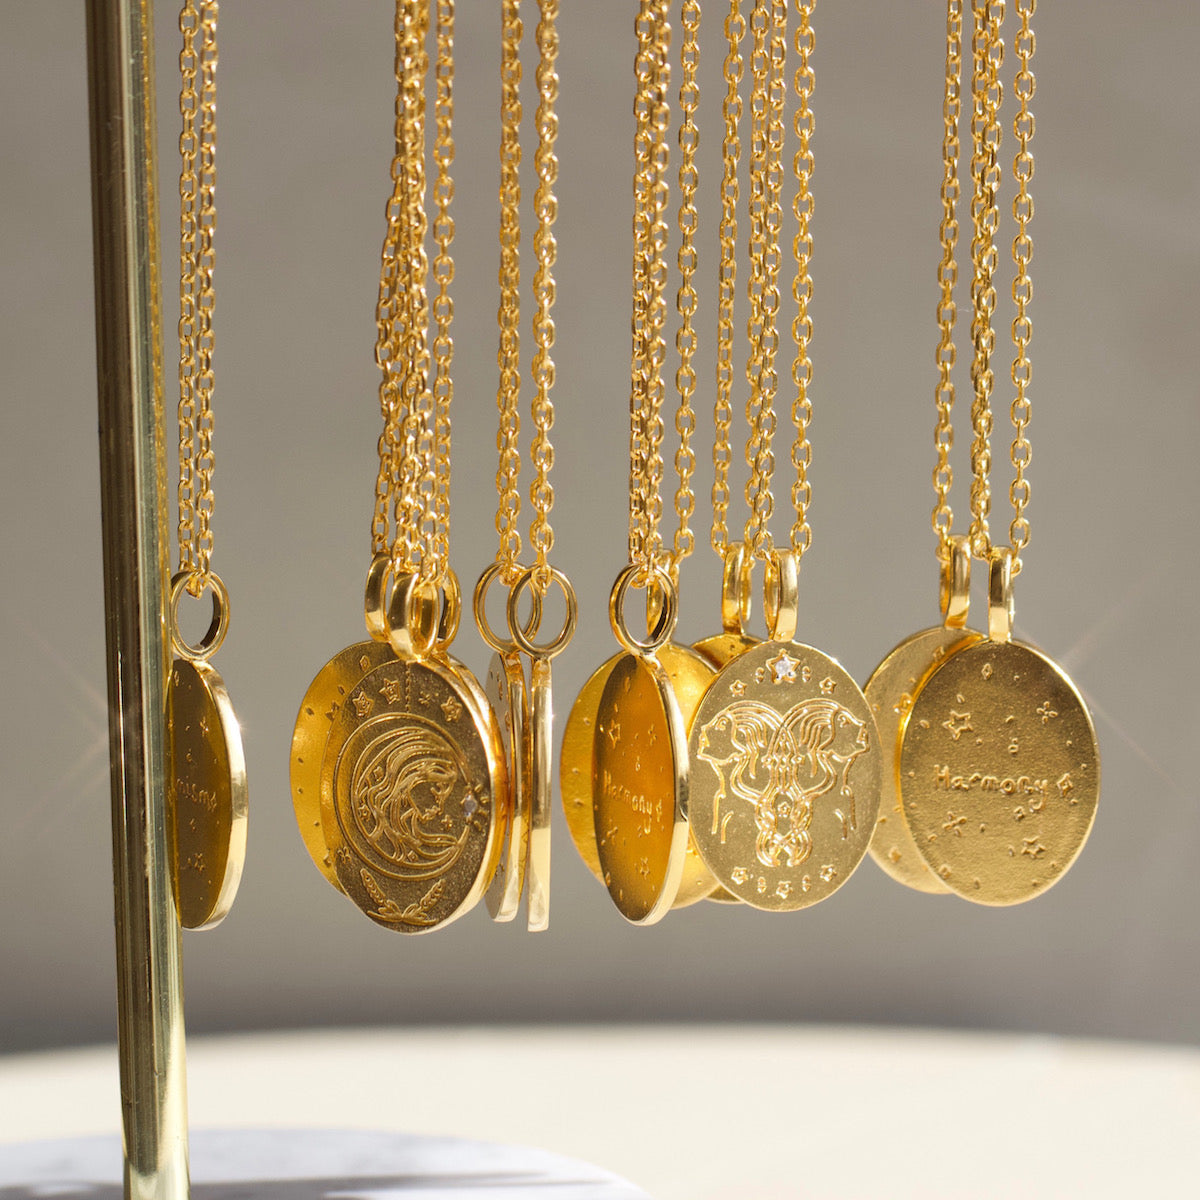 Gorgeous gold vermeil necklaces crafted by Carrie Elizabeth Jewellery